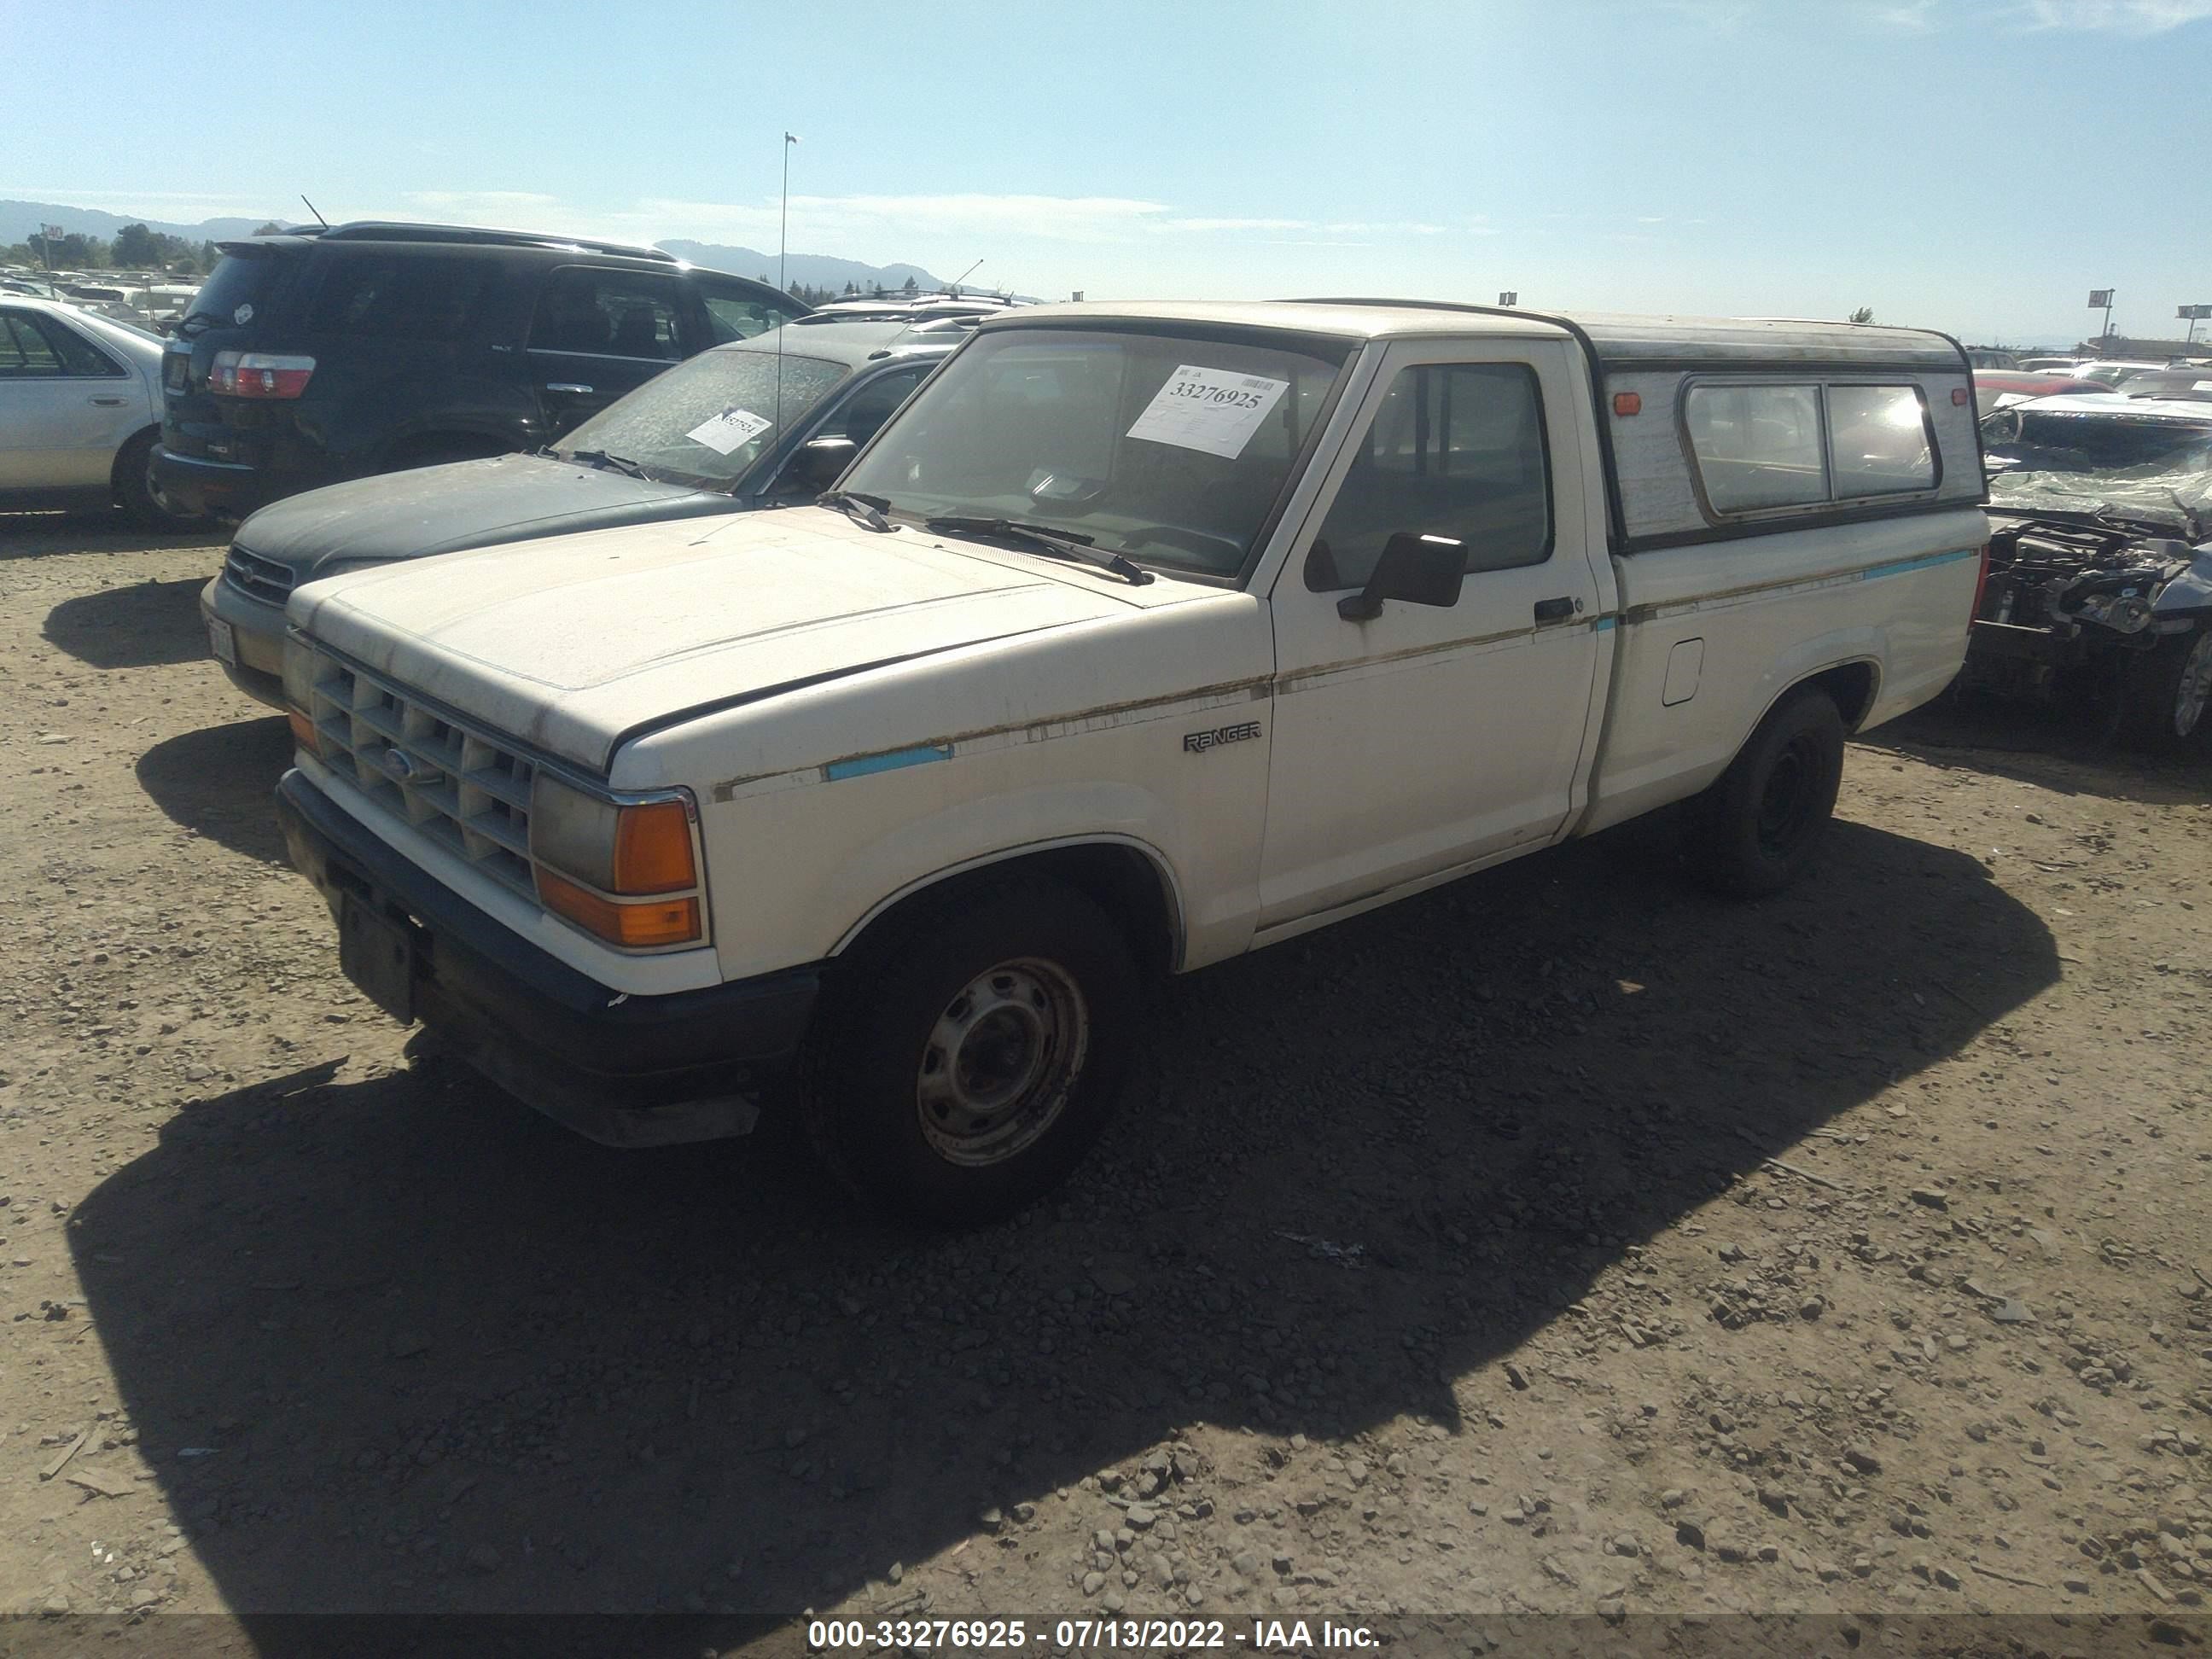 1990 FORD RANGER VIN: 1FTCR10A3LUC29156